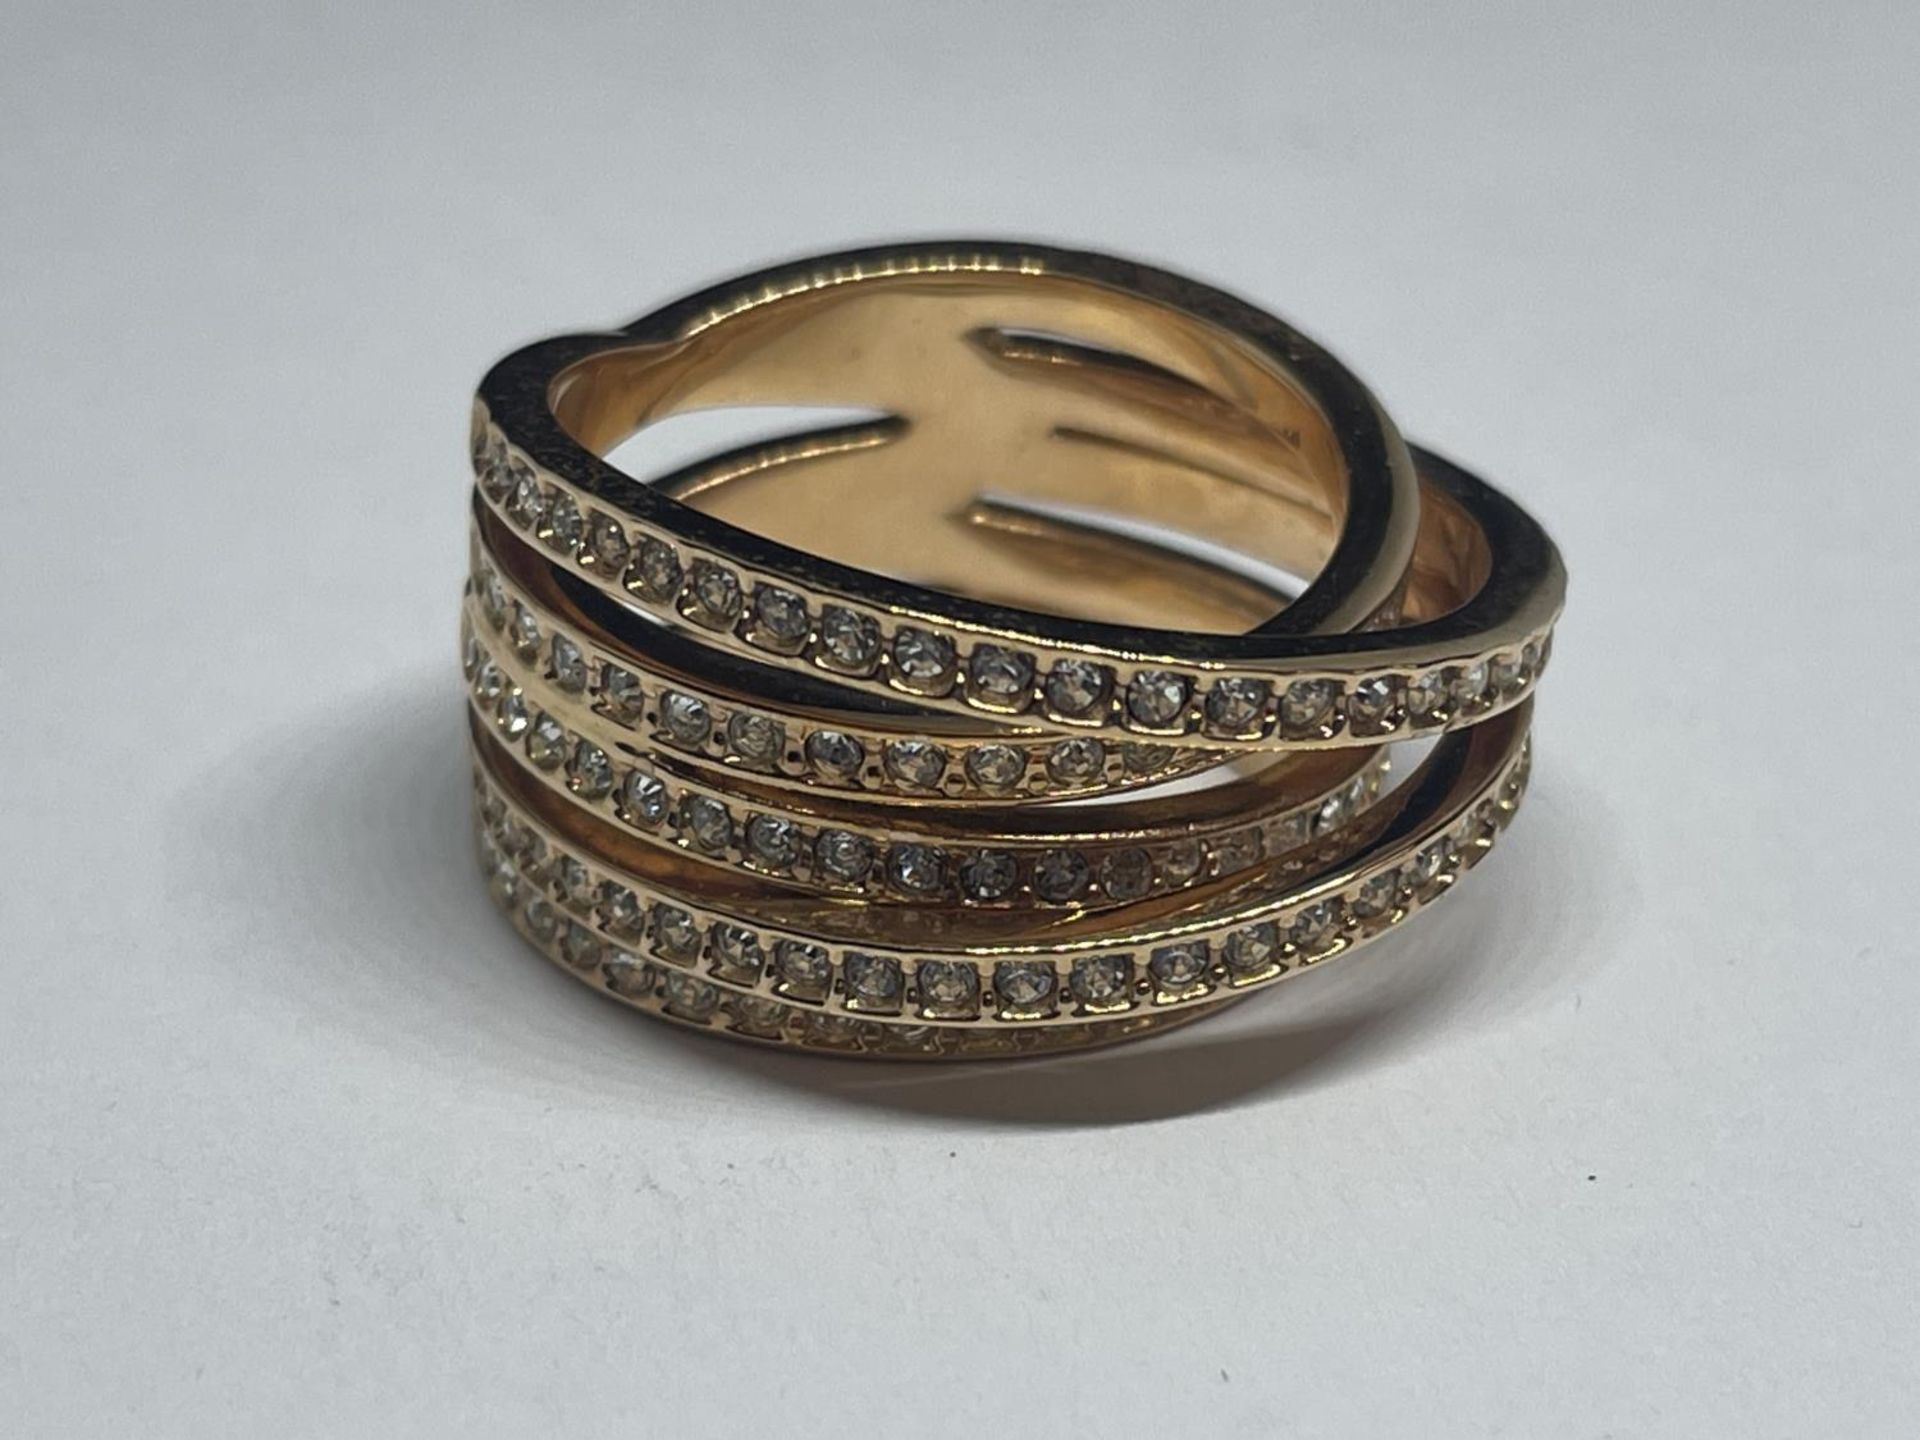 A SWAROVSKI CRYSTAL RING WITH LABEL, PRESENTATION BOX AND SLEEVE SIZE Q